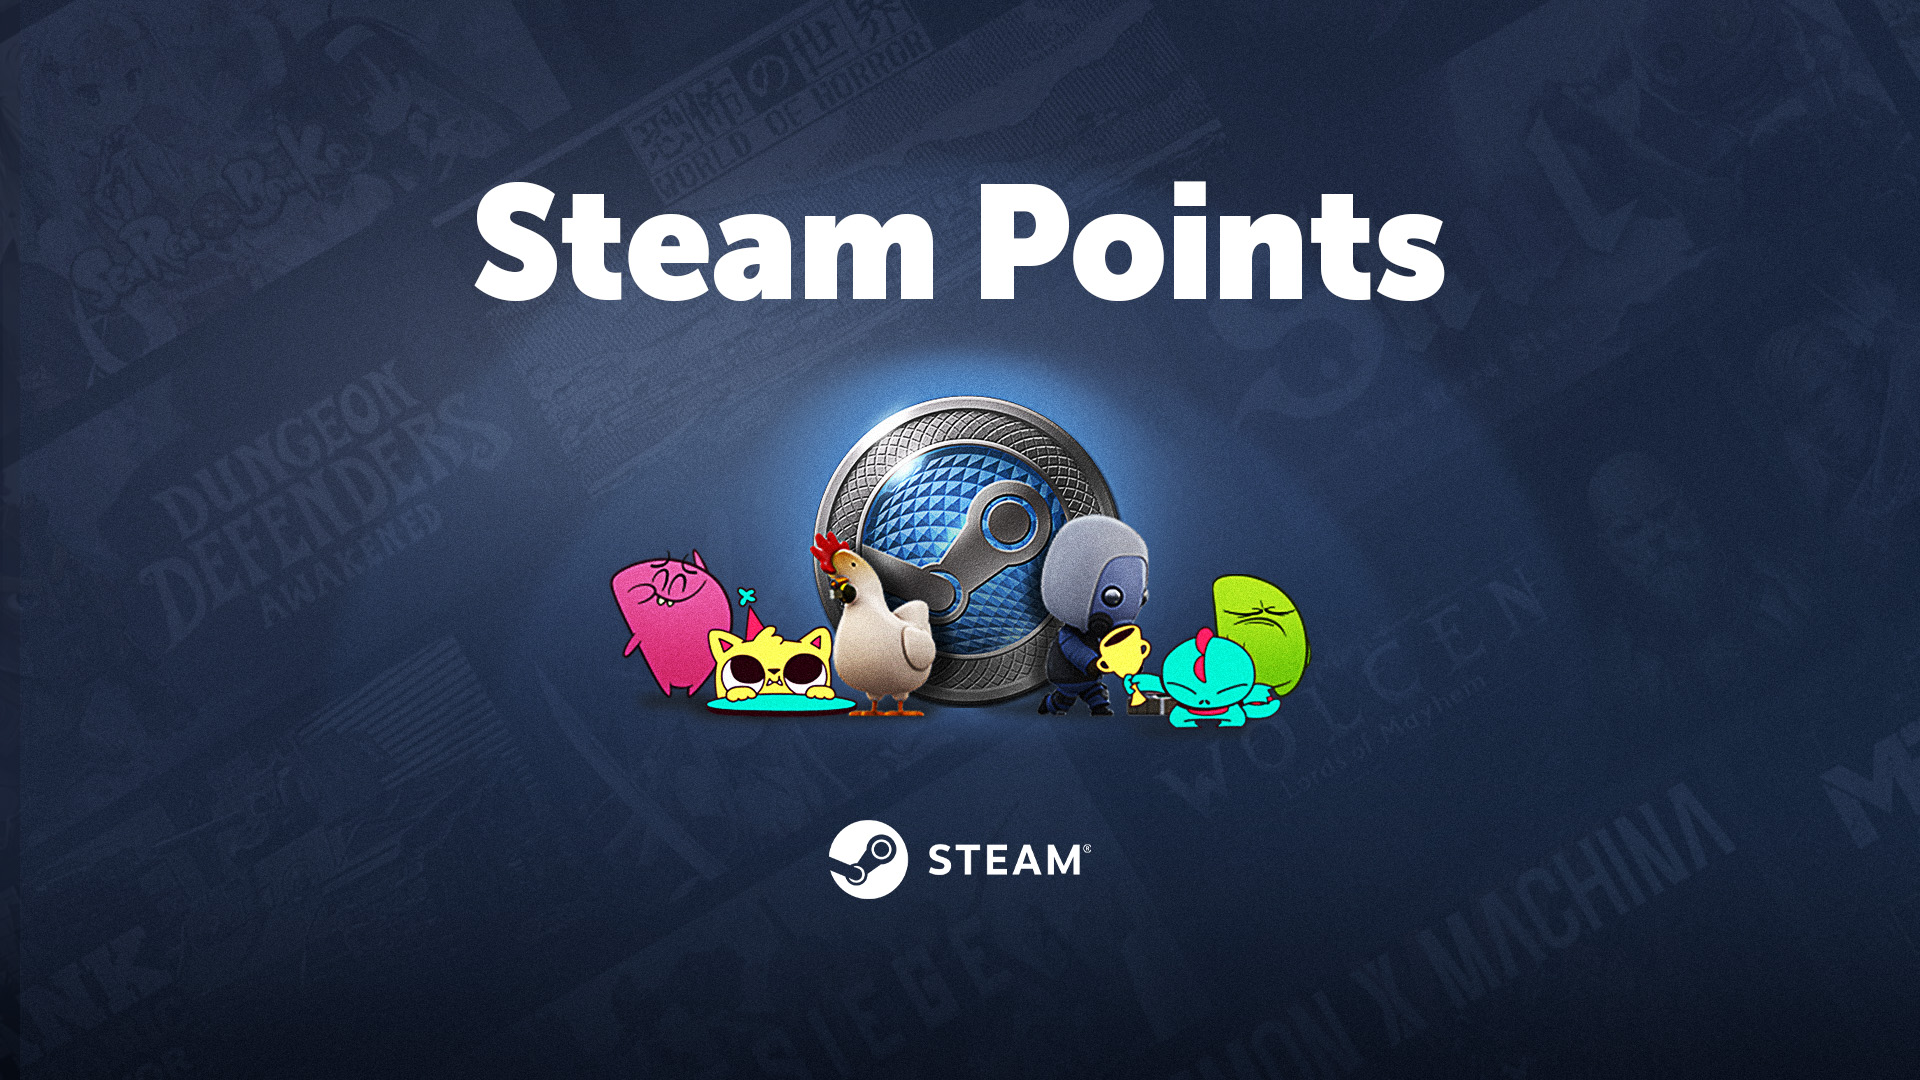 5.000 Steam Points Manual Delivery 2.54 $